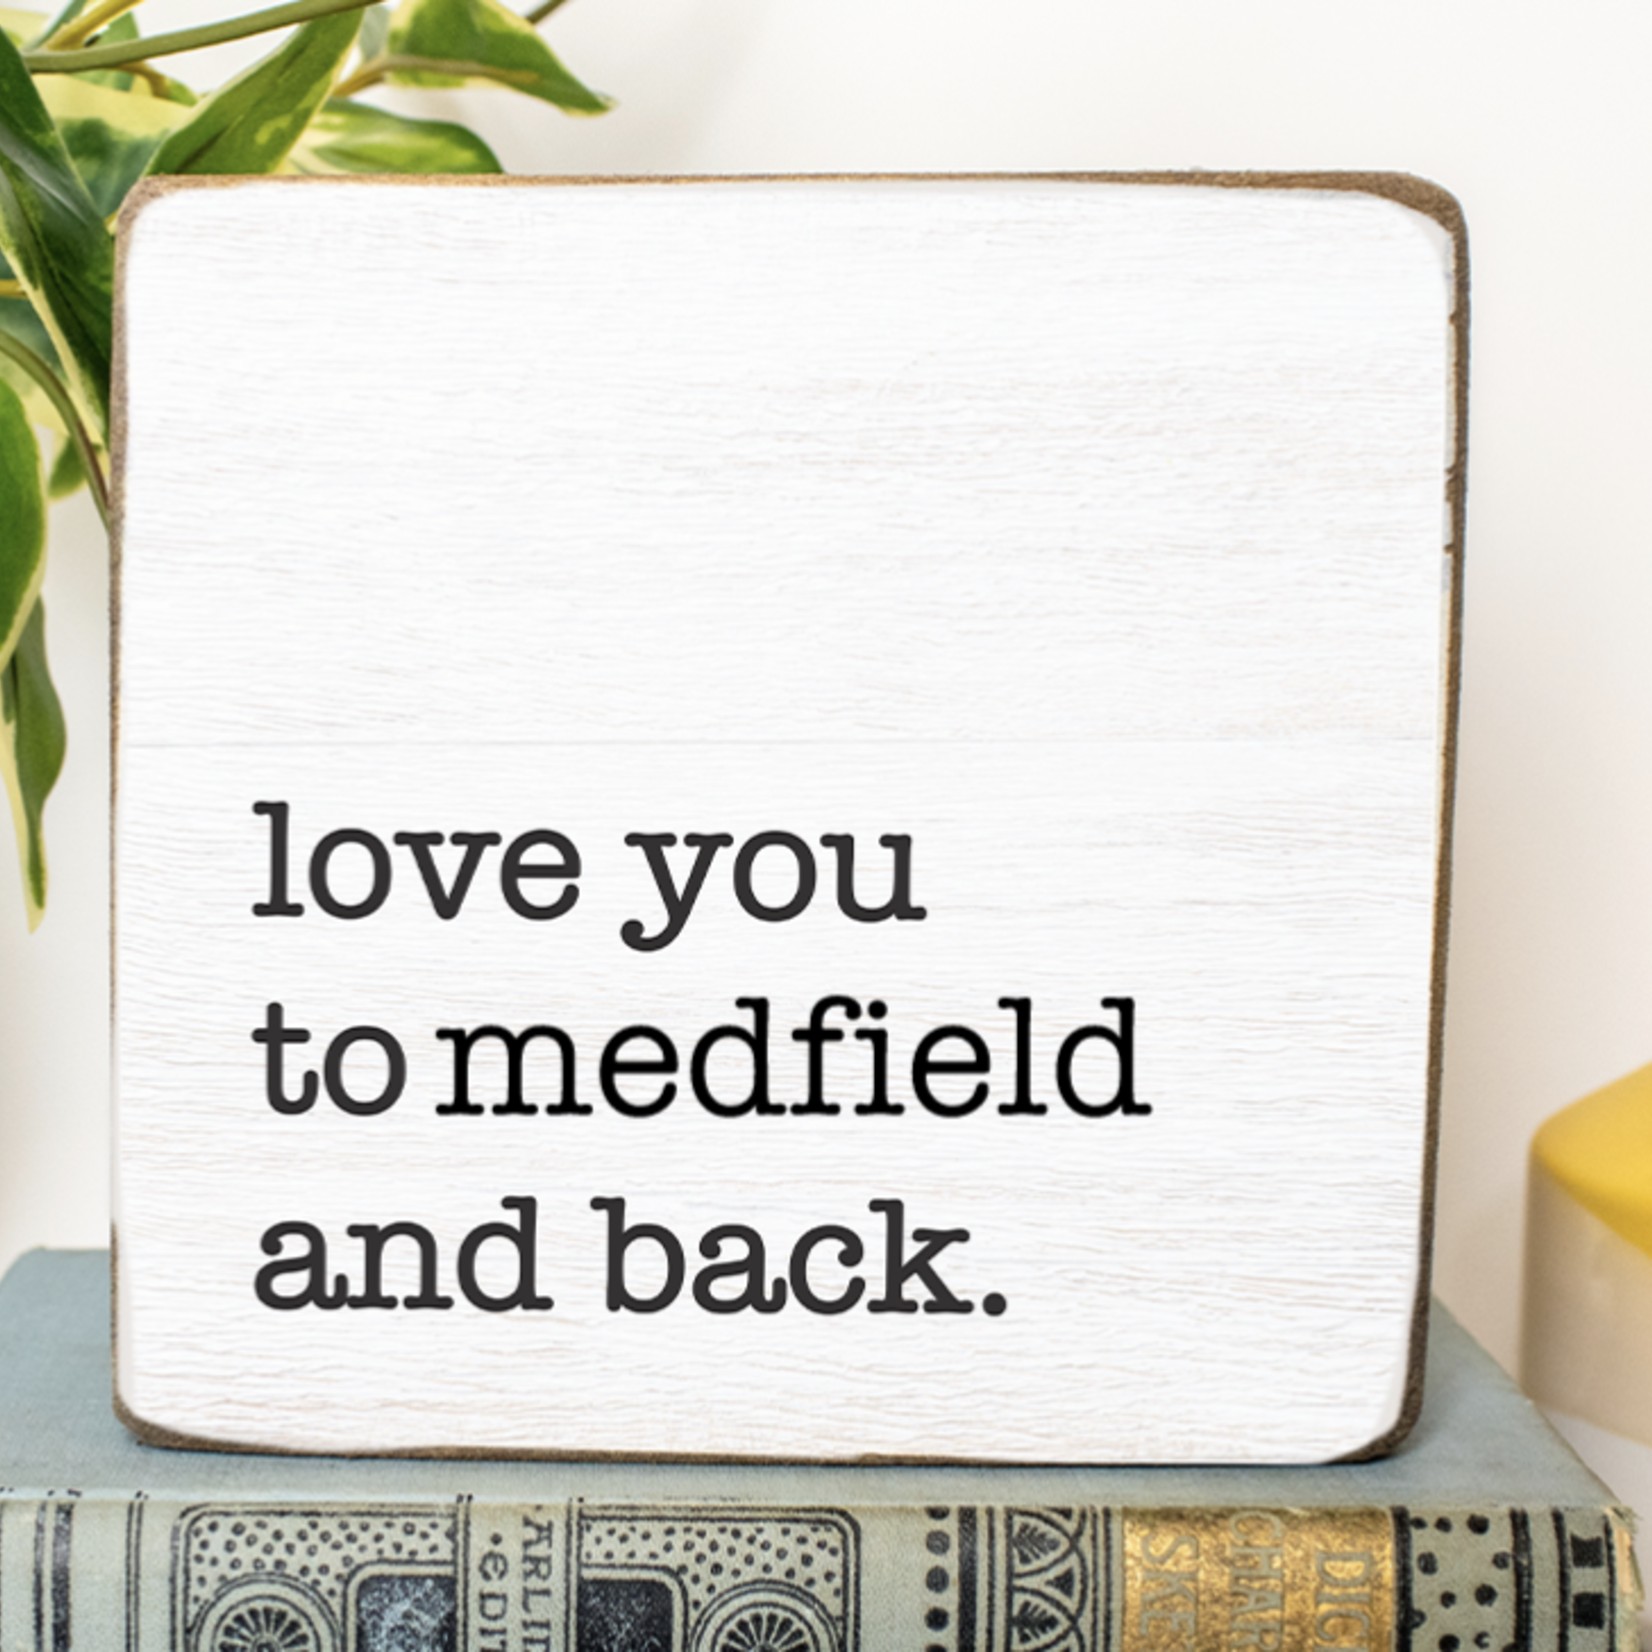 Rustic Marlin Rustic Marlin - 6 x 6 Block - I Love You To Medfield And Back